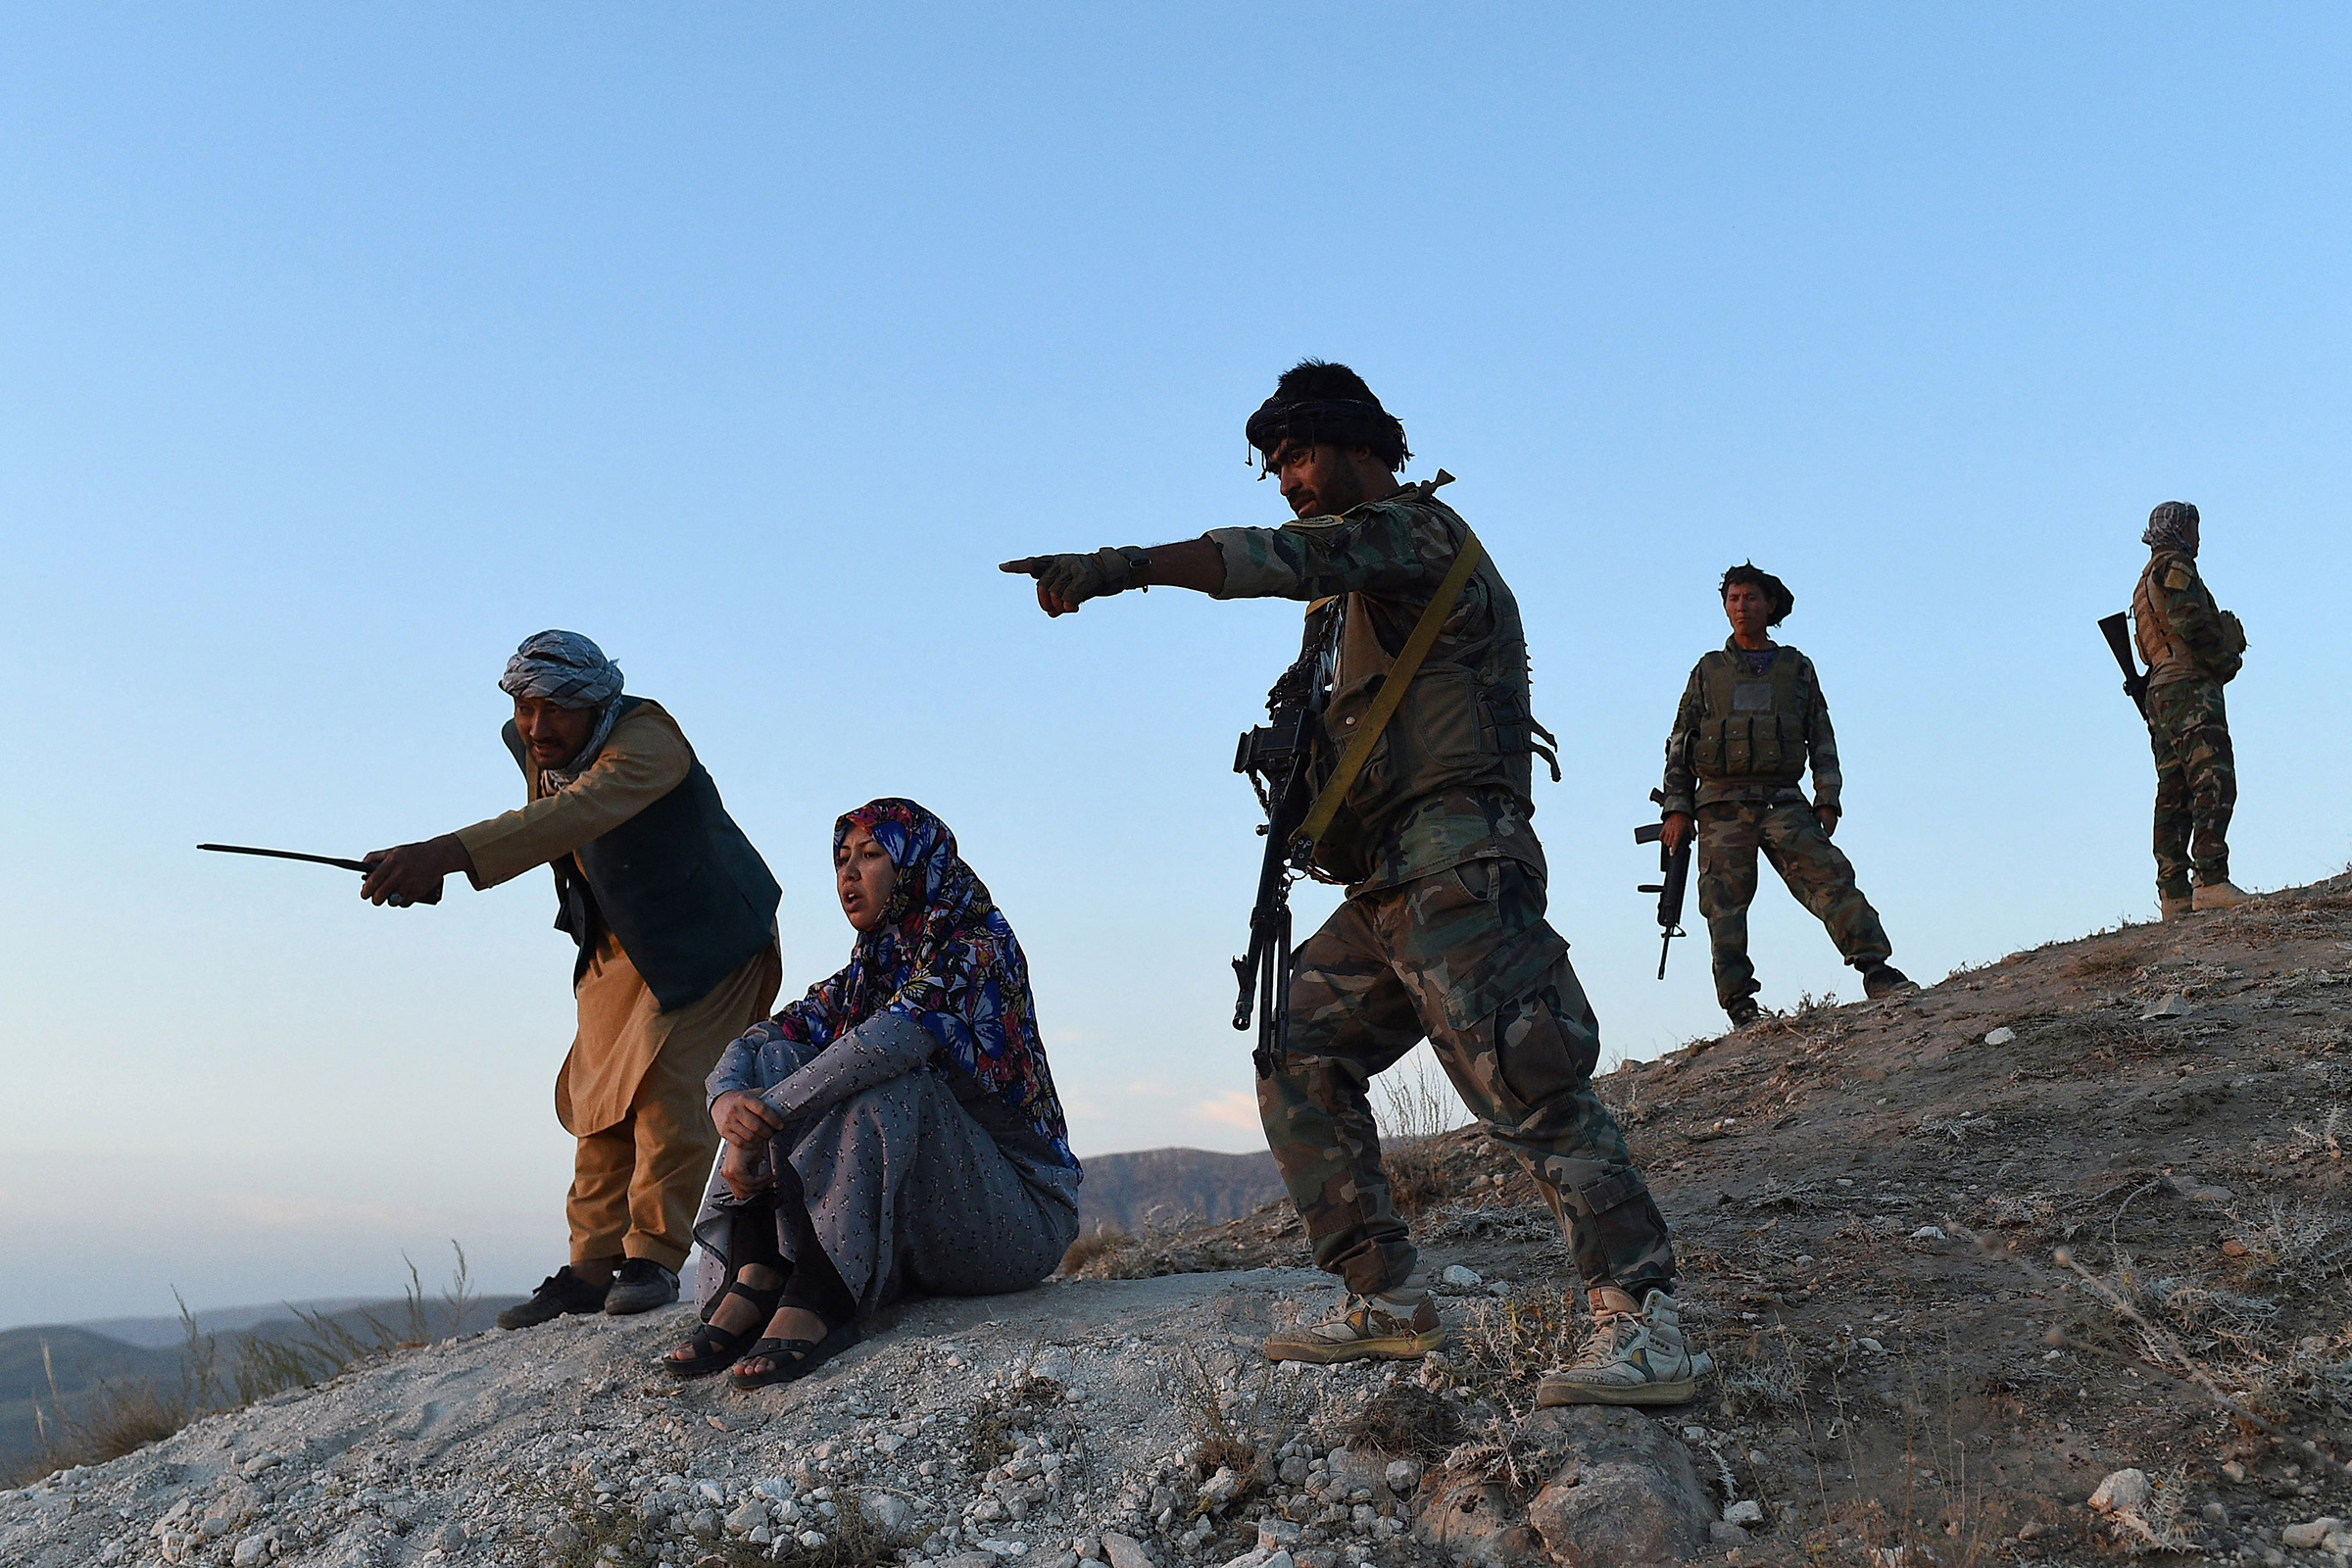 District governor Salima Mazari (second from left) looks on from a hill while accompanied by security personnel near the frontlines against the Taliban, at Charkint district in Balkh province, Afghanistan, on July 14. (Farshad Usyan—AFP/Getty Images)